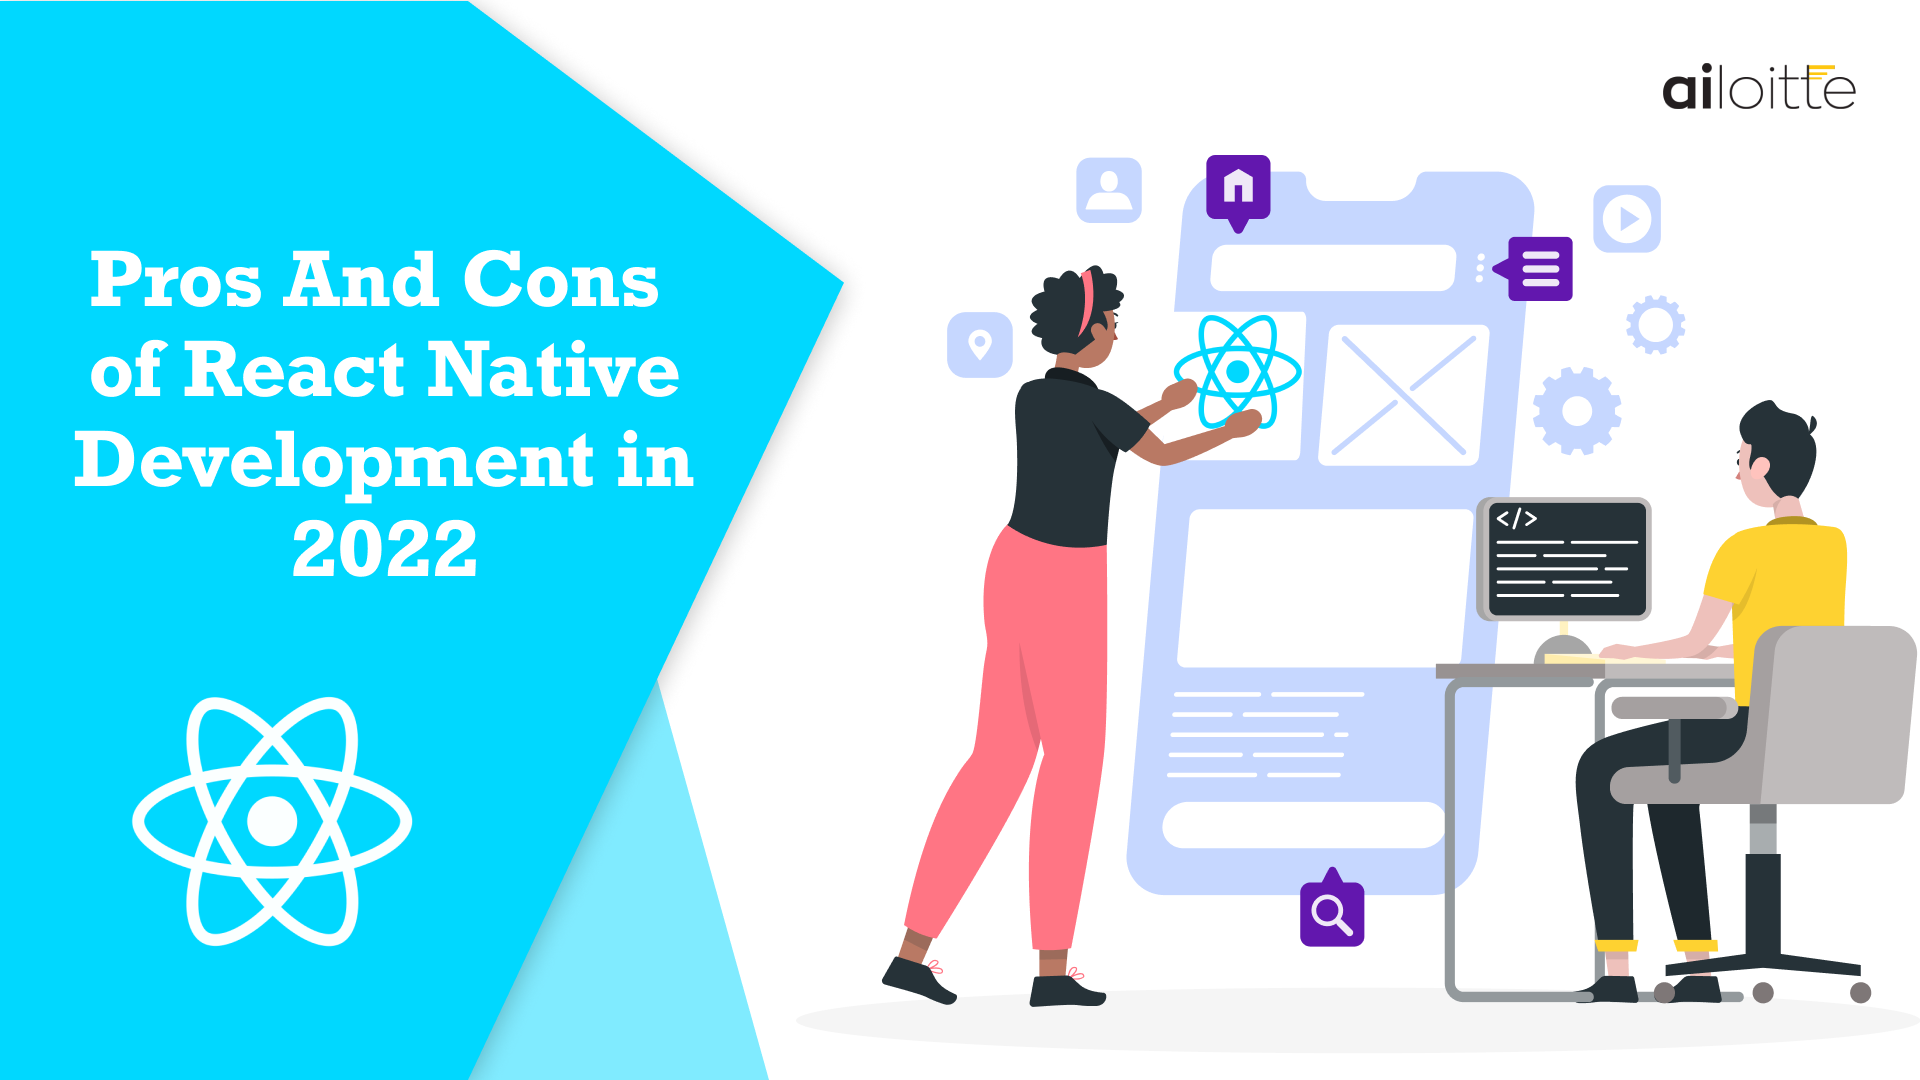 Pros And Cons of React Native Development